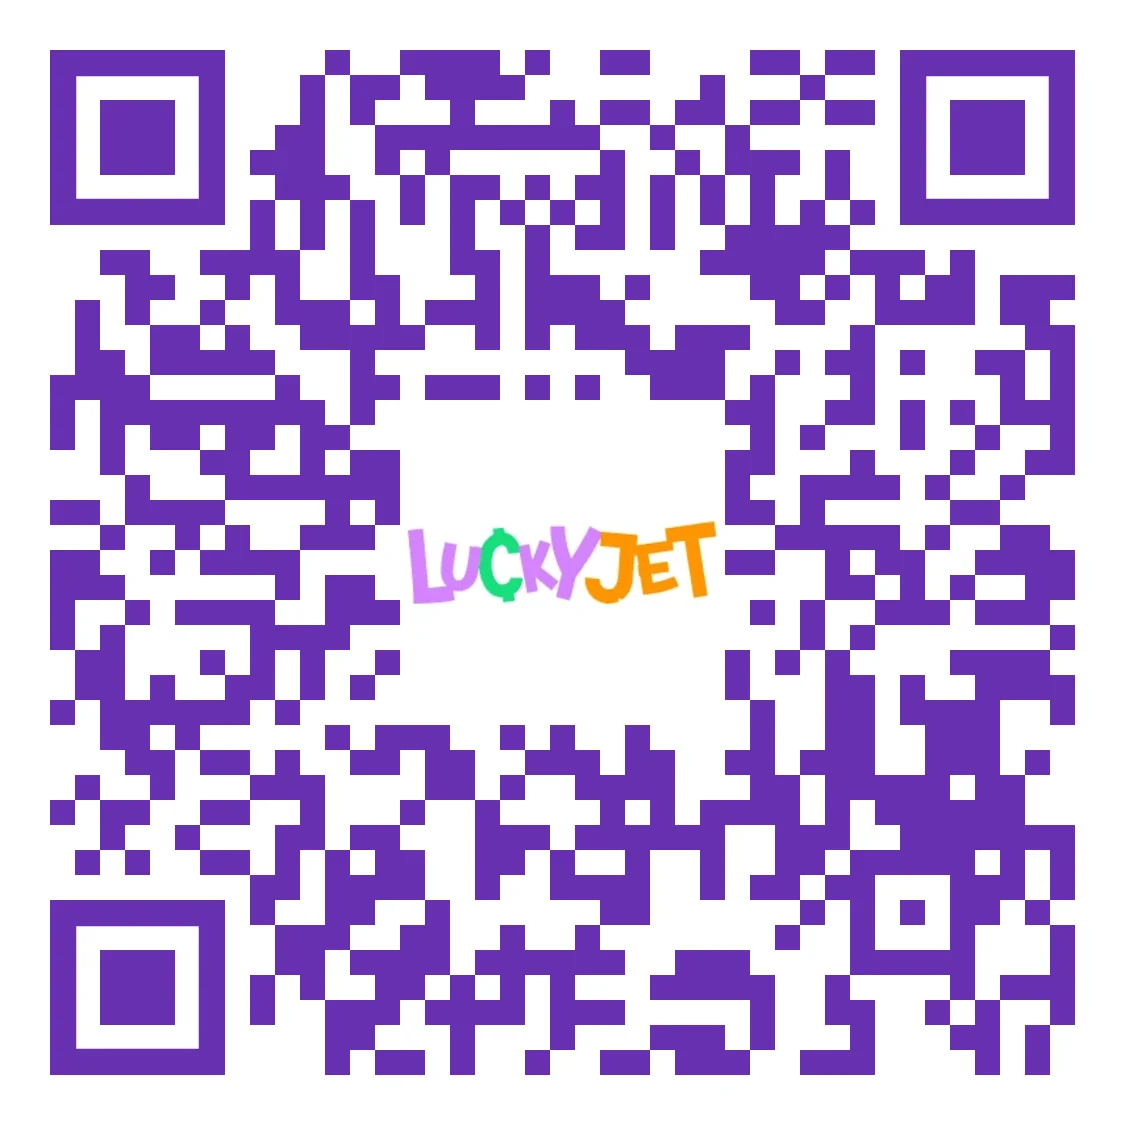 You can download the Lucky Jet Predictor APK using QR code.